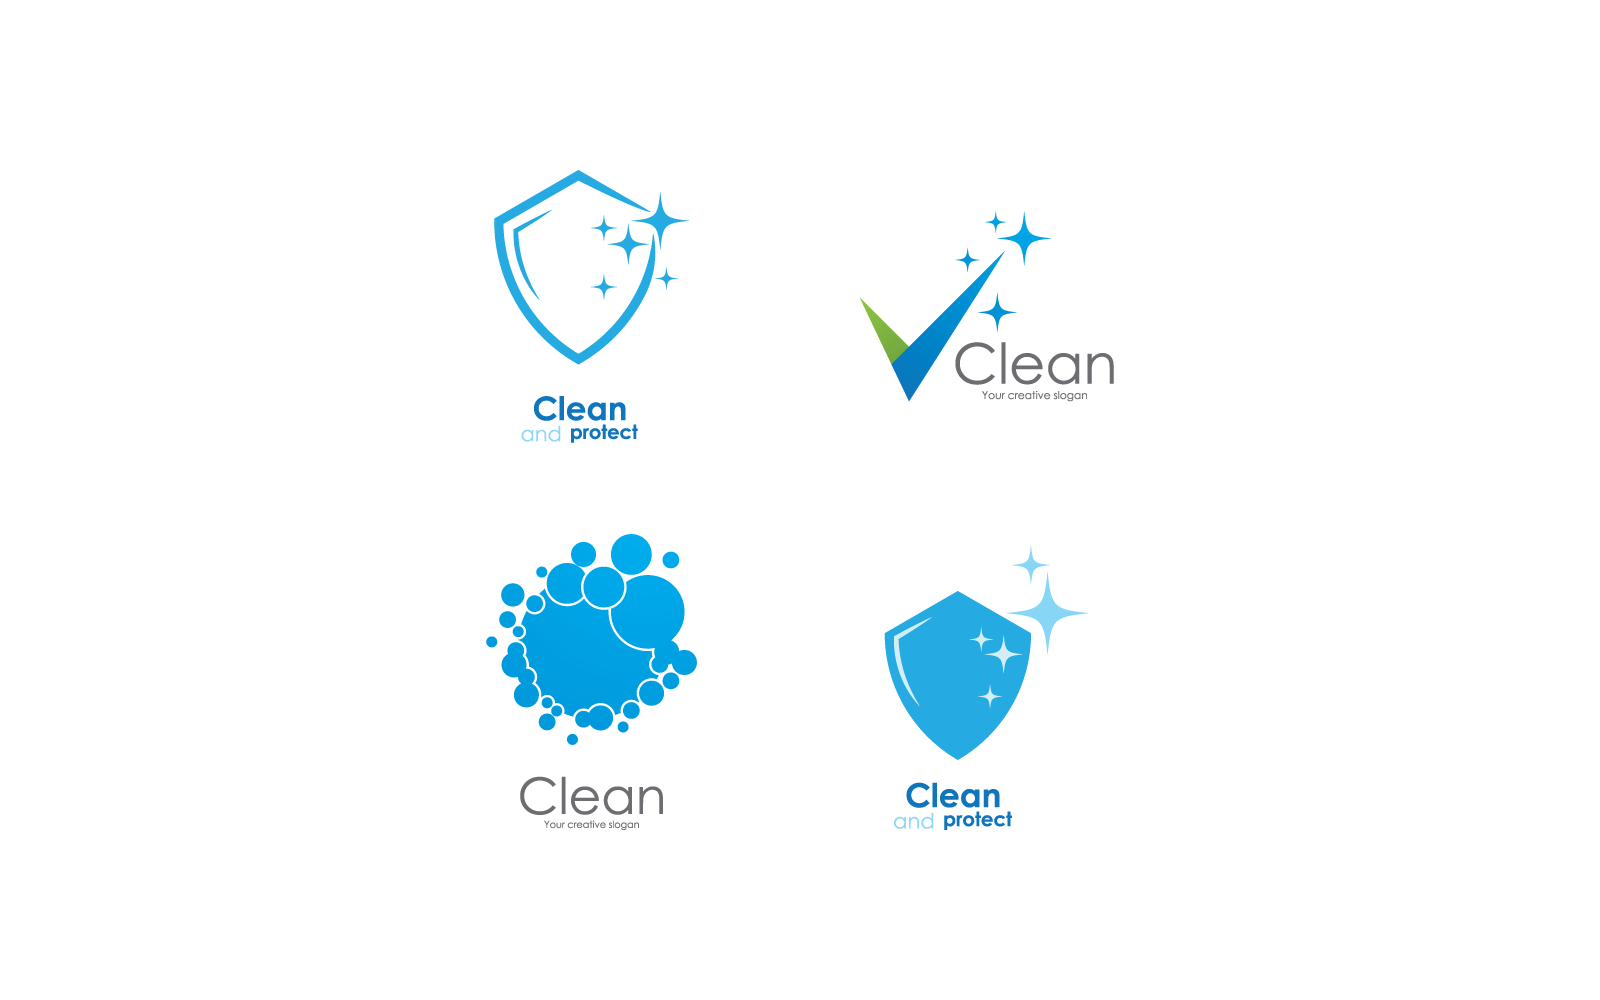 Cleaning logo design and symbol illustration vector template